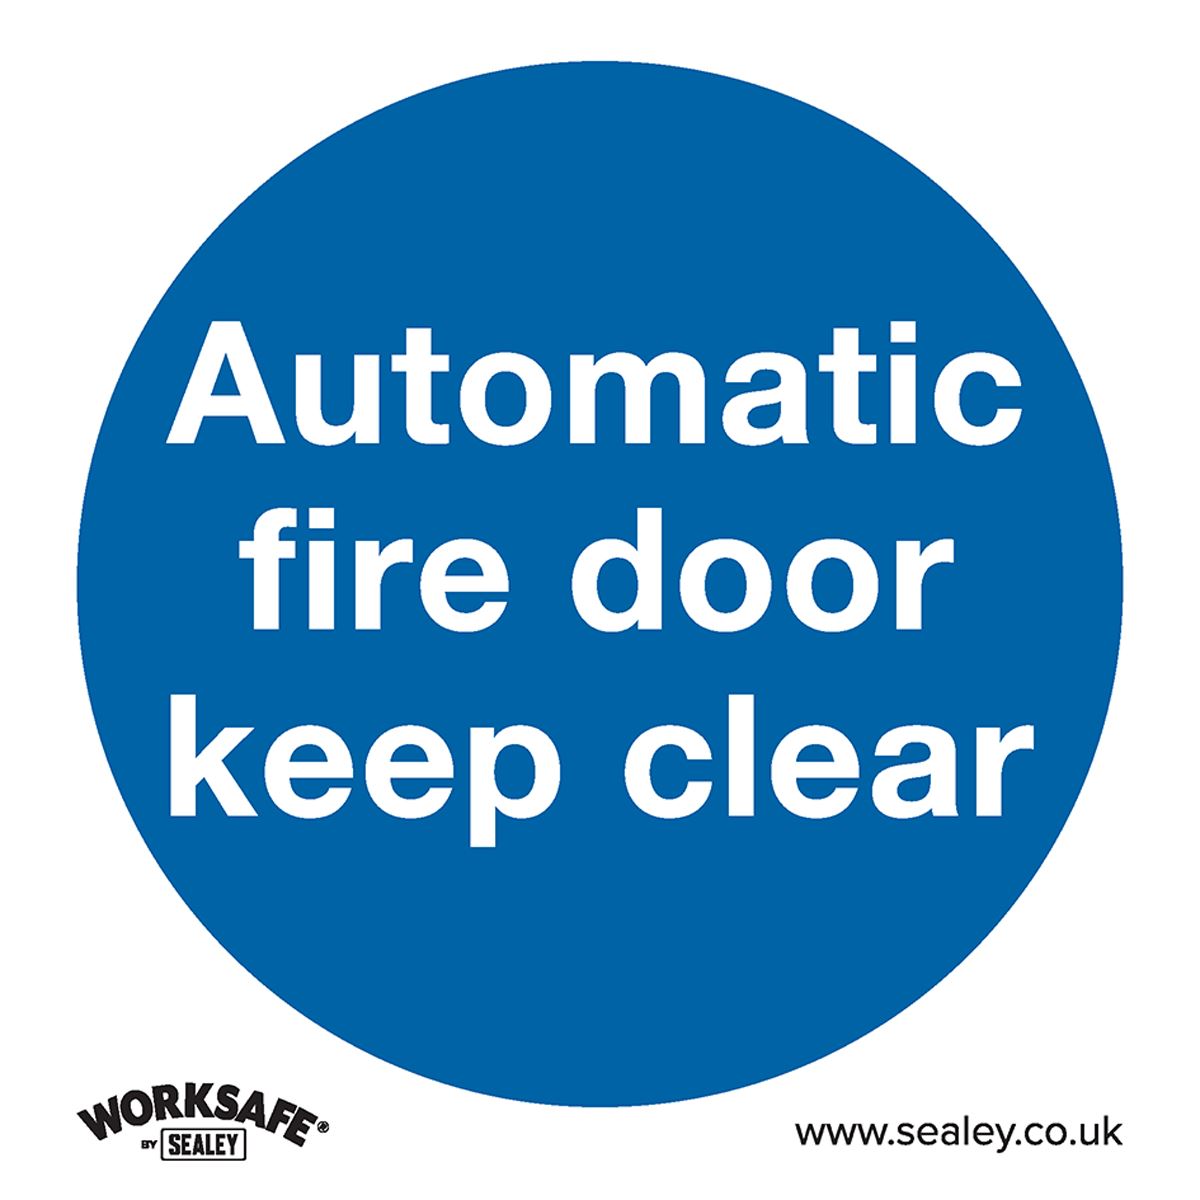 Worksafe by Sealey Mandatory Safety Sign - Automatic Fire Door Keep Clear - Rigid Plastic